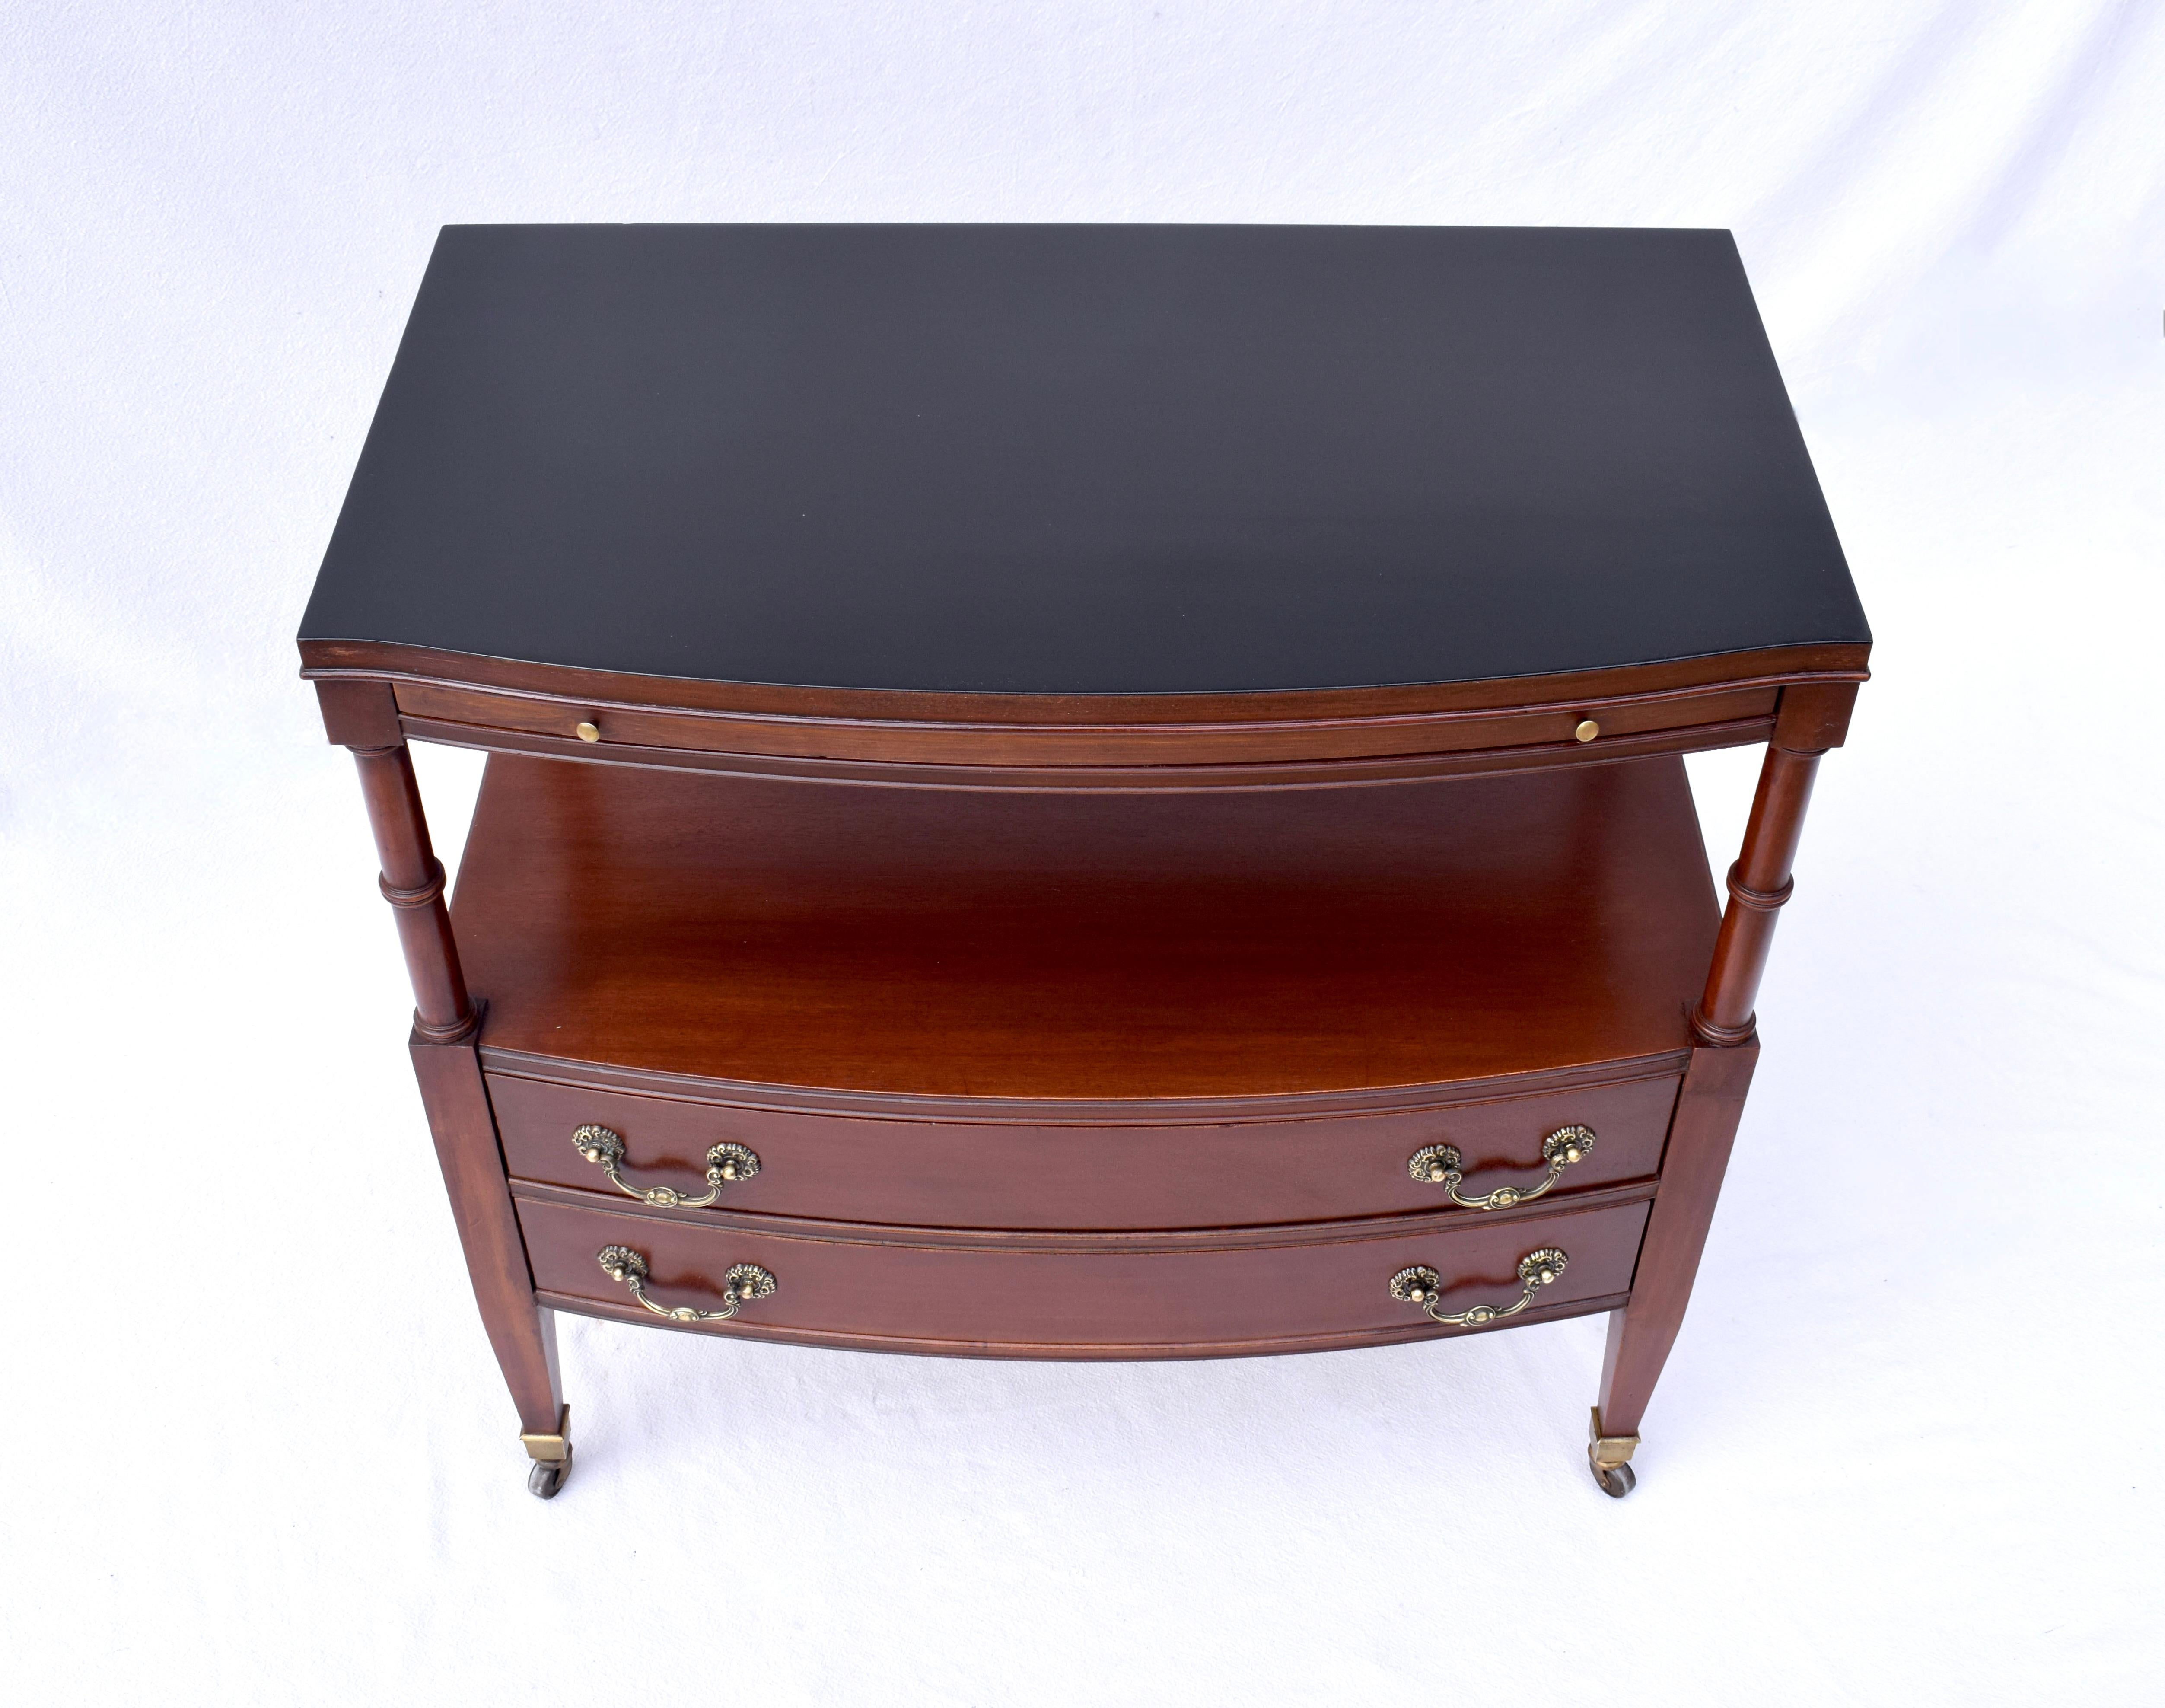 A Versatile Mahogany server in the Regency style featuring two dovetail drawers, a hidden top shelf that pulls out, bottom shelf and overall beautiful Mahogany. Set on brass castors, moveable from room to room, this could be used as a buffet, bar